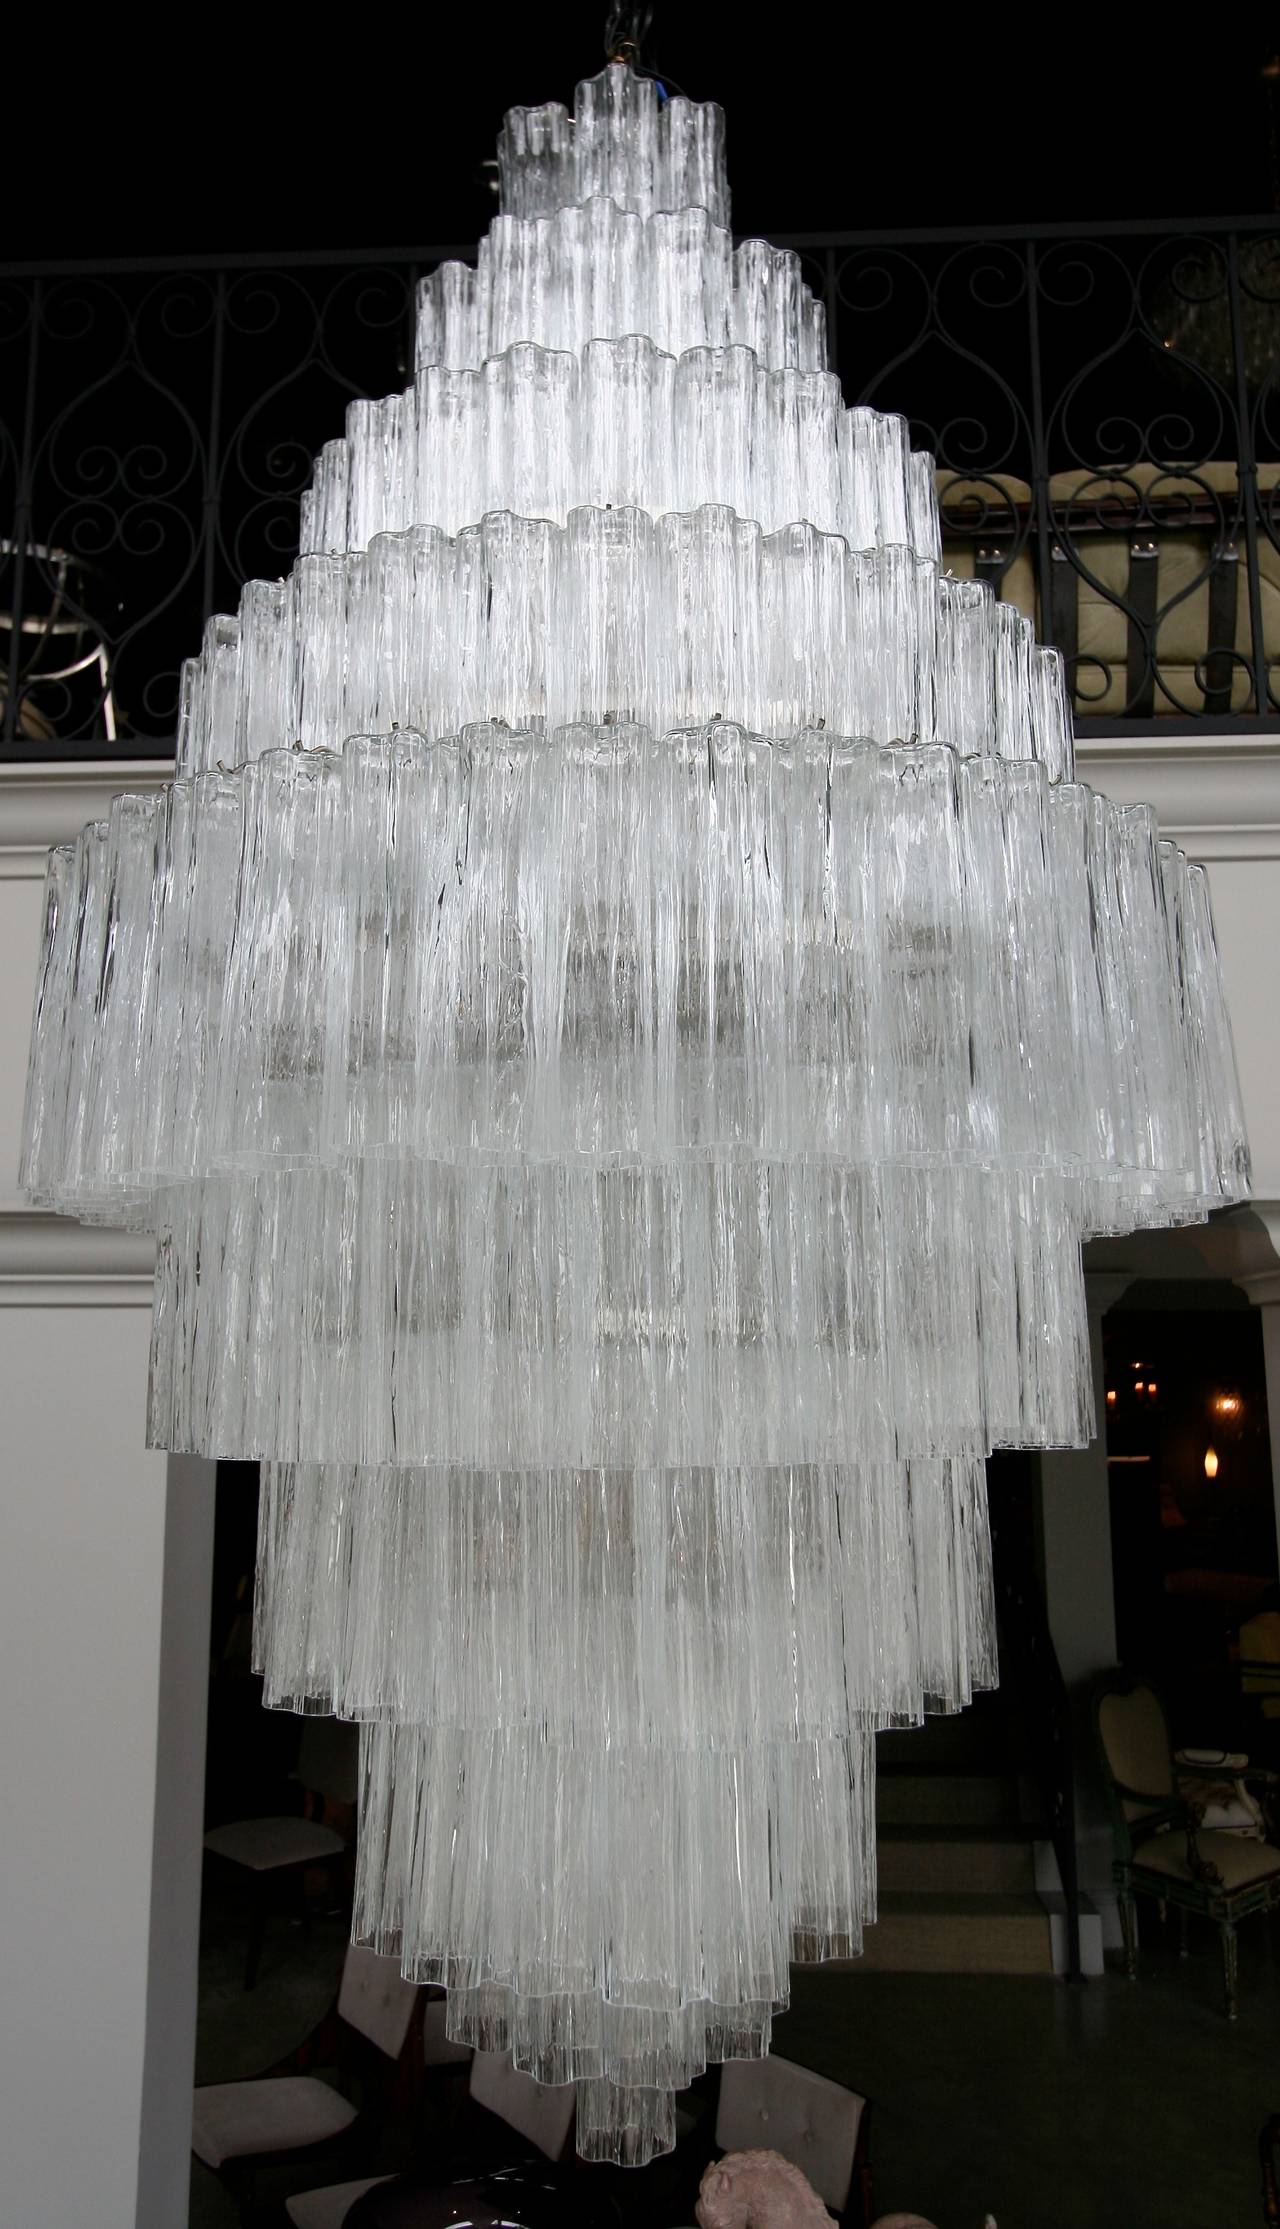 Murano glass chandelier from the 1970s with ten tiers of clear tronchi glass, totaling 197 pieces of glass with 18 lights.